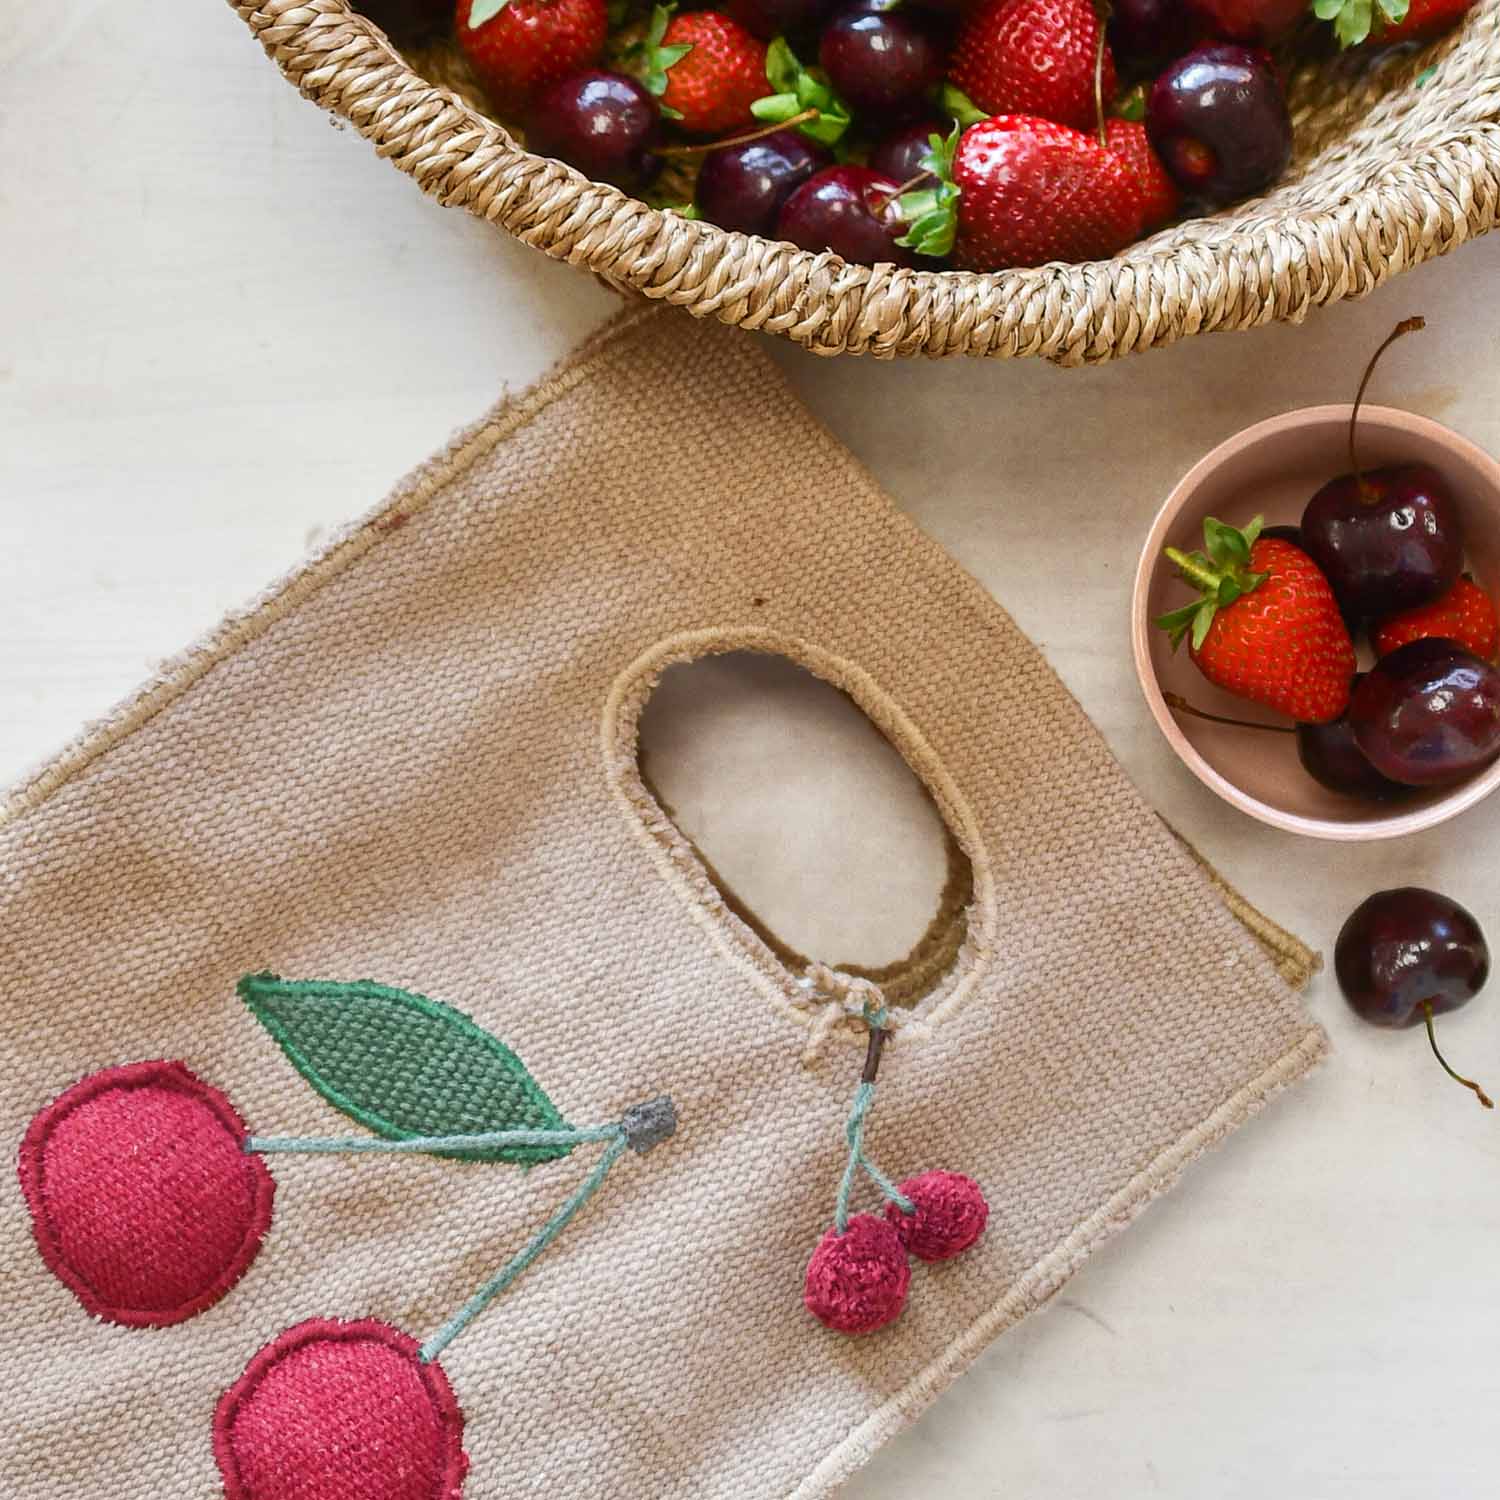 Mery the Cherry Lunch Bag